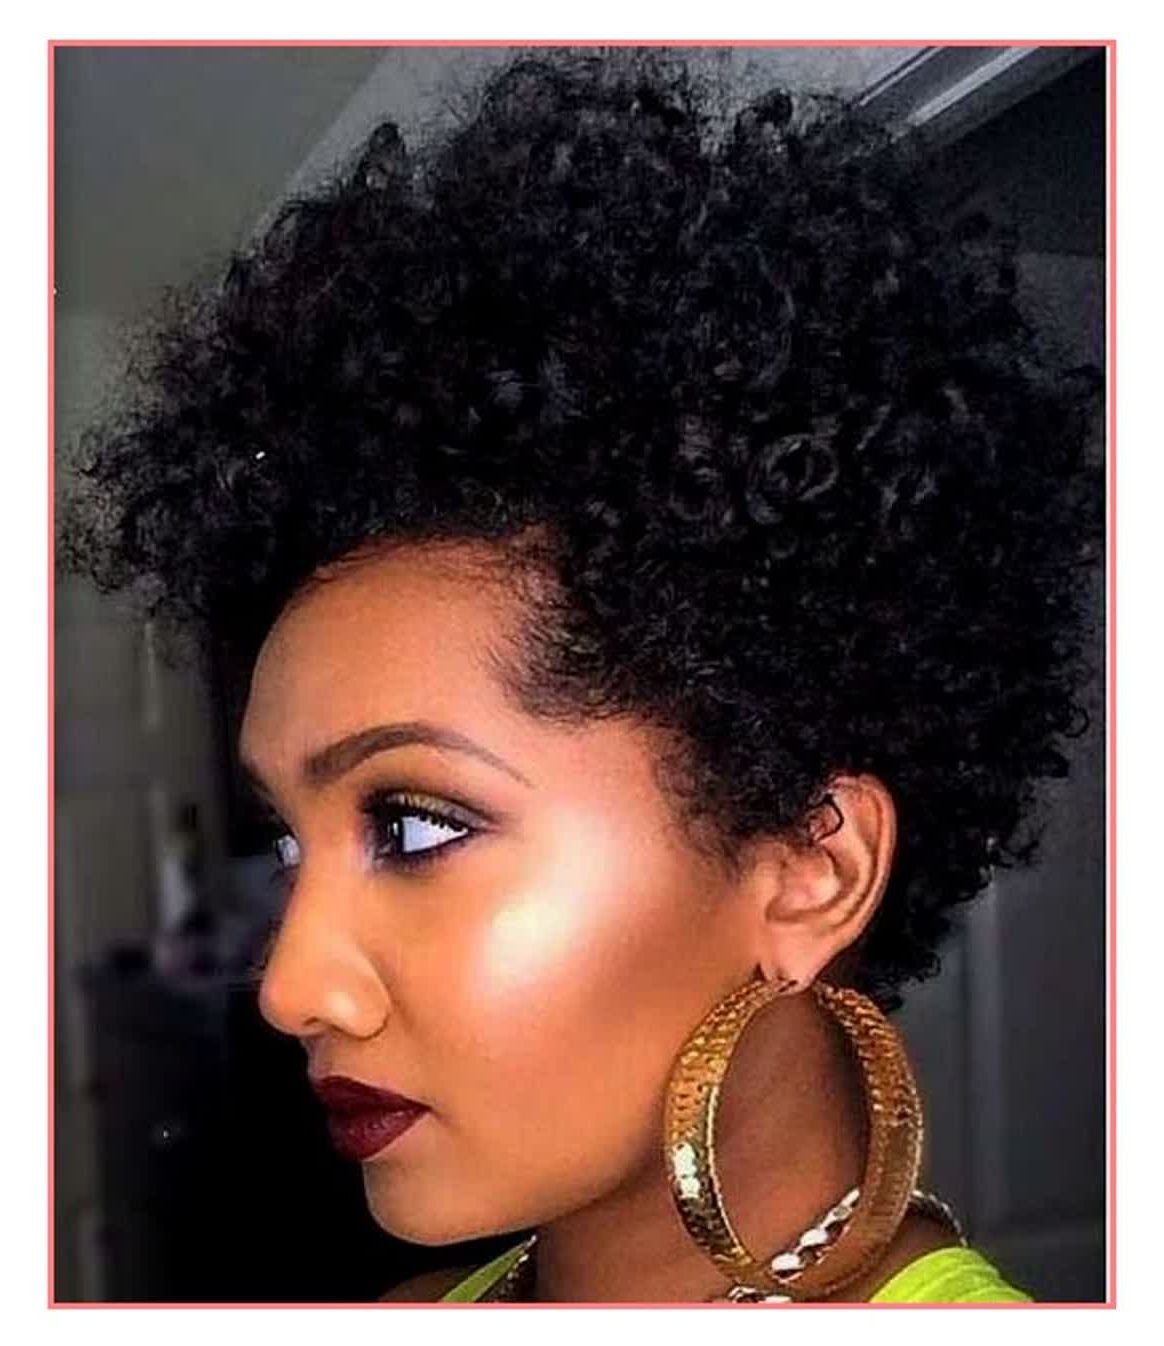 Hair Cuts : Naturally Curly Haircuts Glamorous Pictures Of Short Inside Favorite Medium Hairstyles For Black Women With Oval Faces (View 11 of 20)